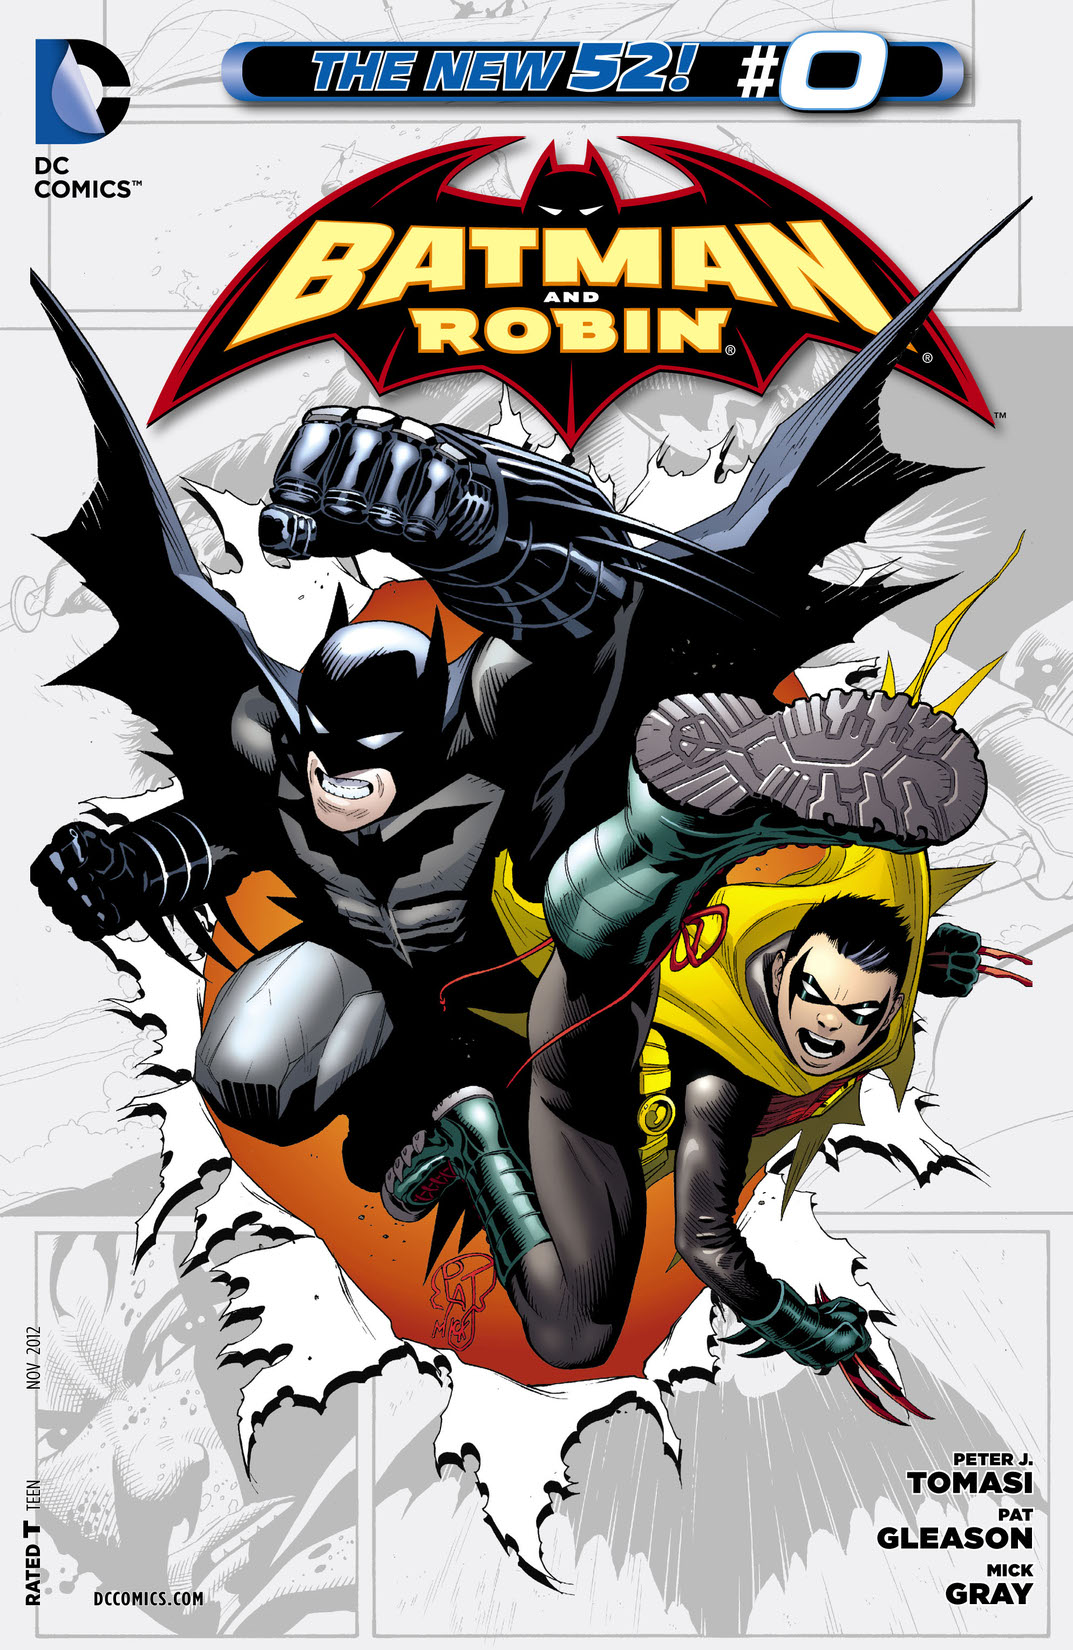 Batman and Robin (2011-) #0 preview images